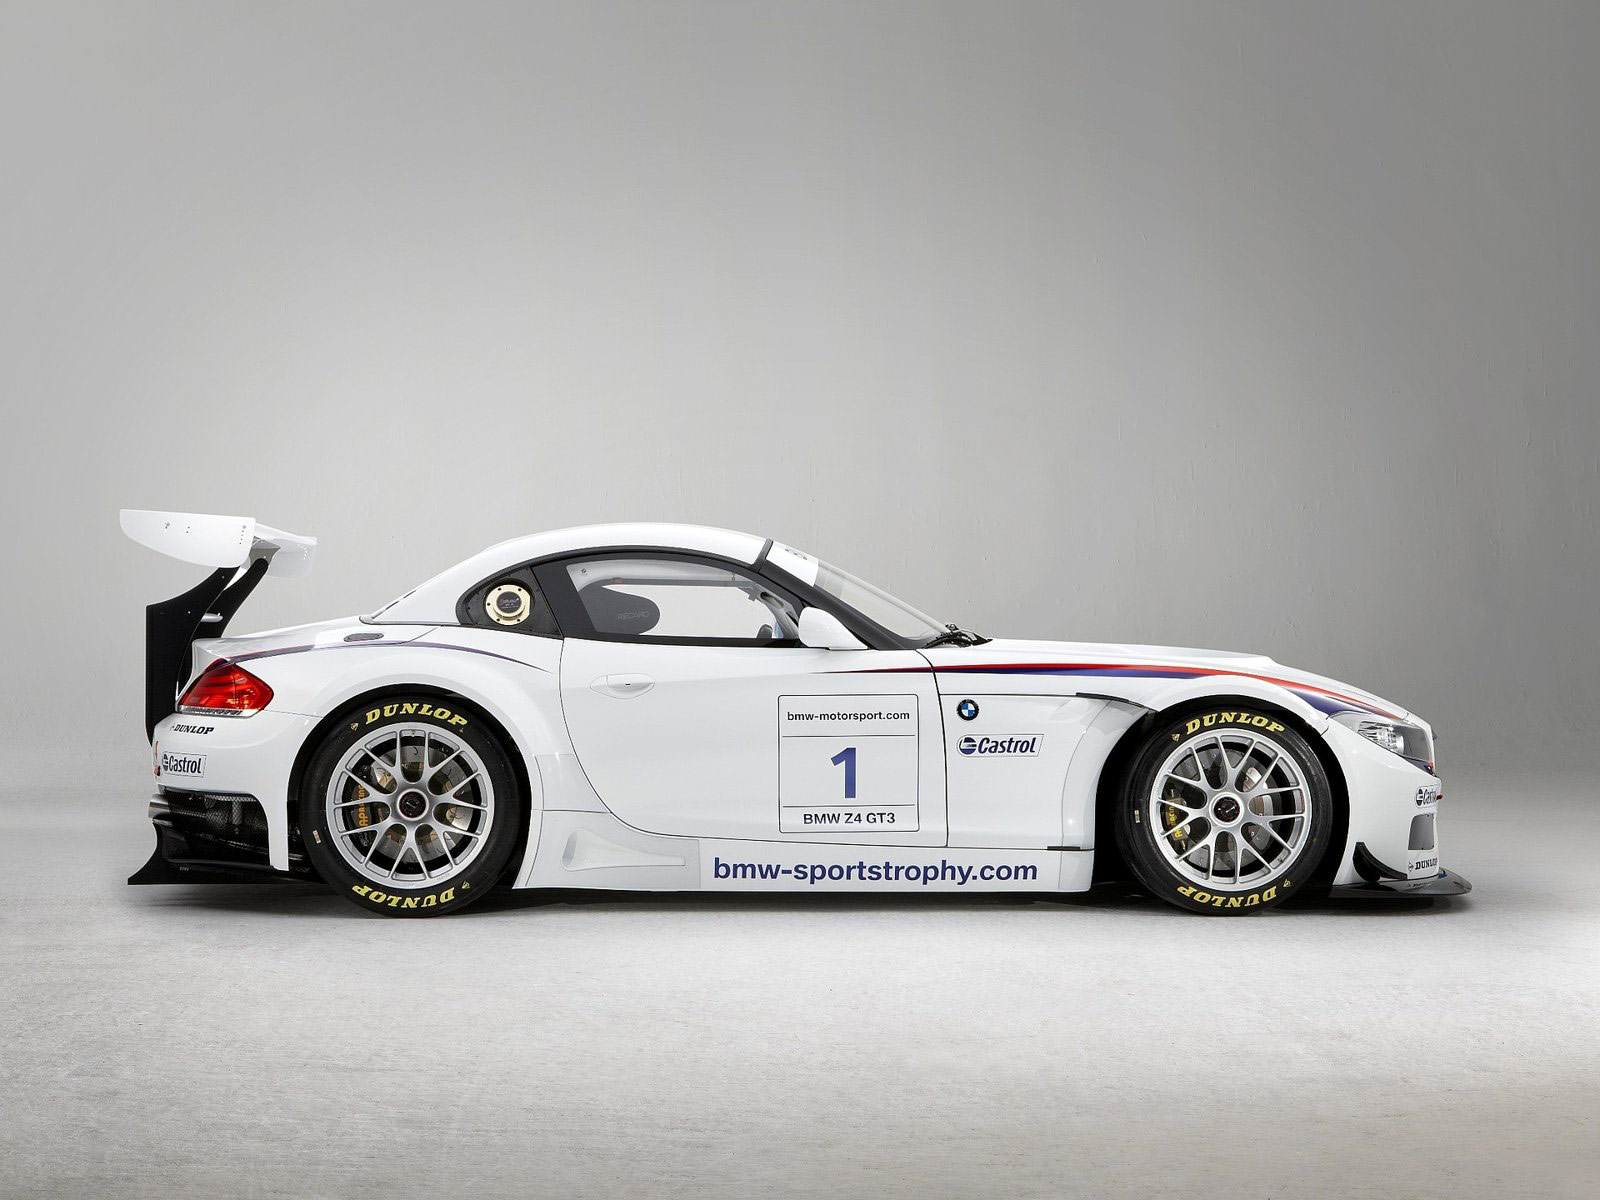  mobil BMW Z4  GT3 2010 insurance info pictures